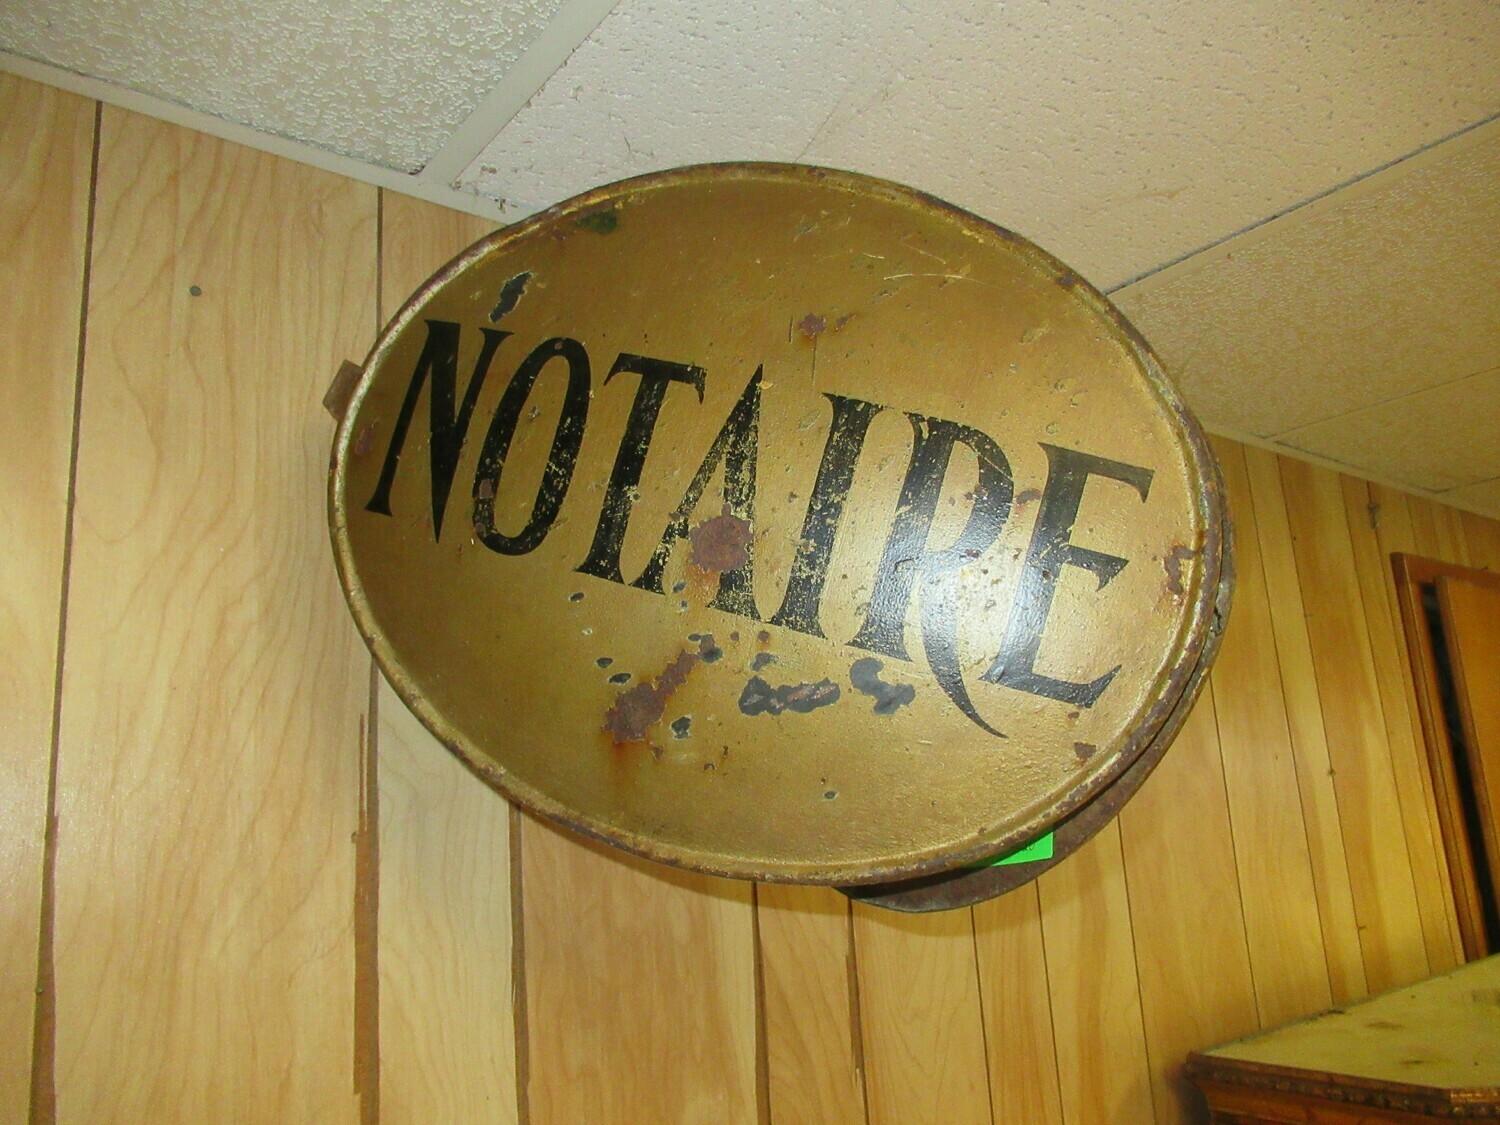 Notaire Sign